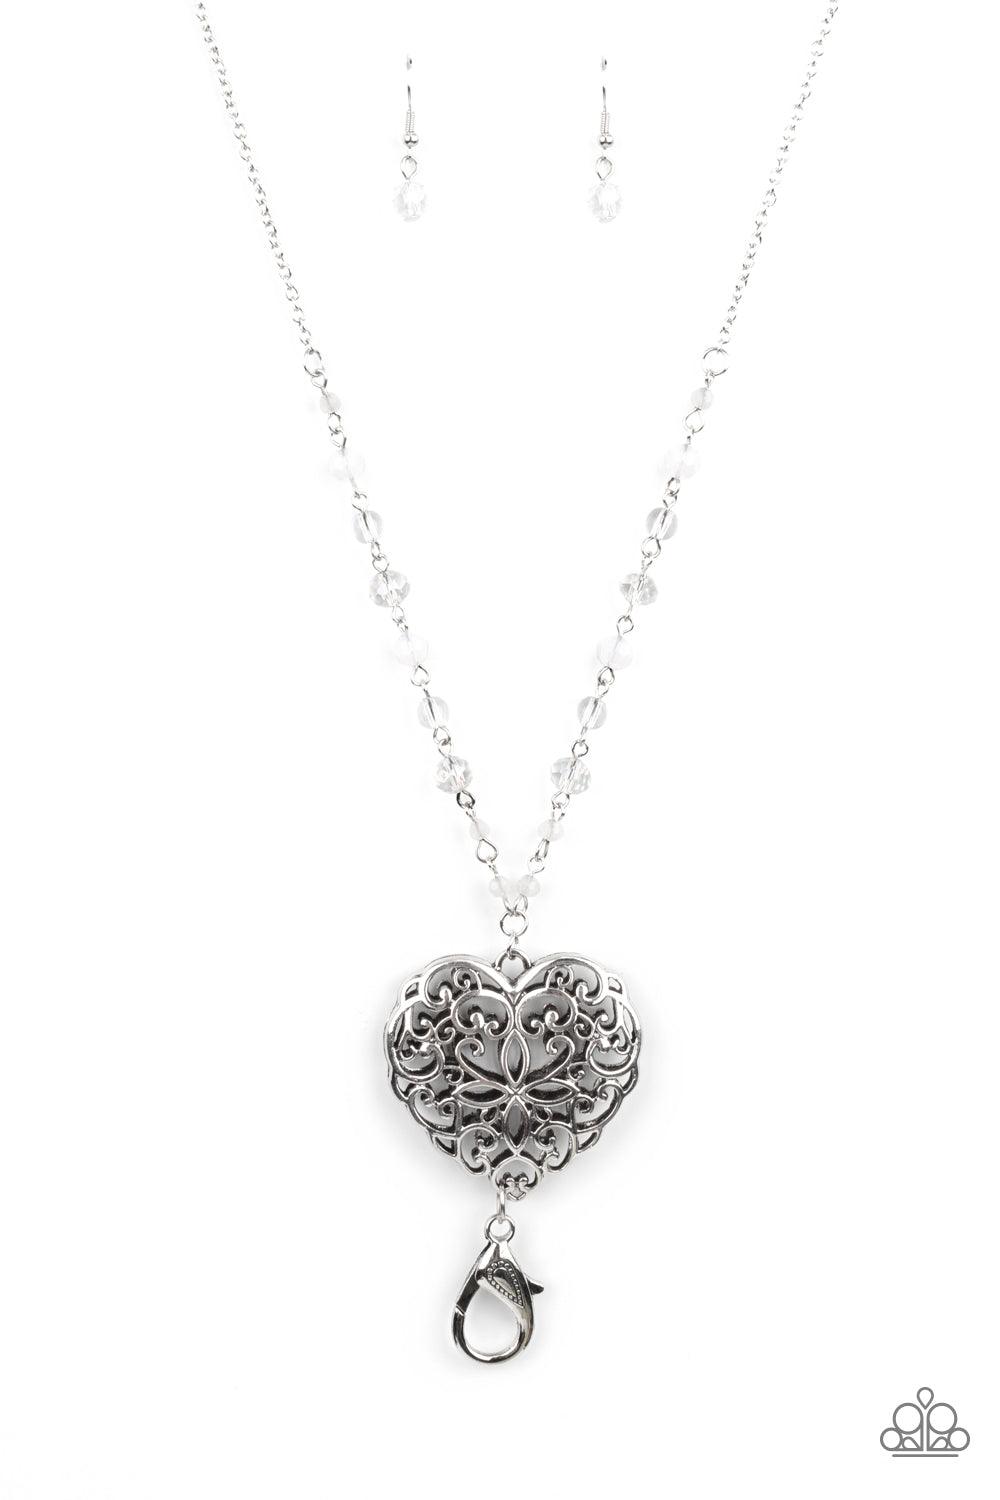 Paparazzi Accessories Doting Devotion - White *Lanyard A dainty collection of opaque, glassy, and crystal-like beads give way to an oversized filigree filled heart frame, creating an antiqued locket inspired pendant at the bottom of a lengthened silver ch